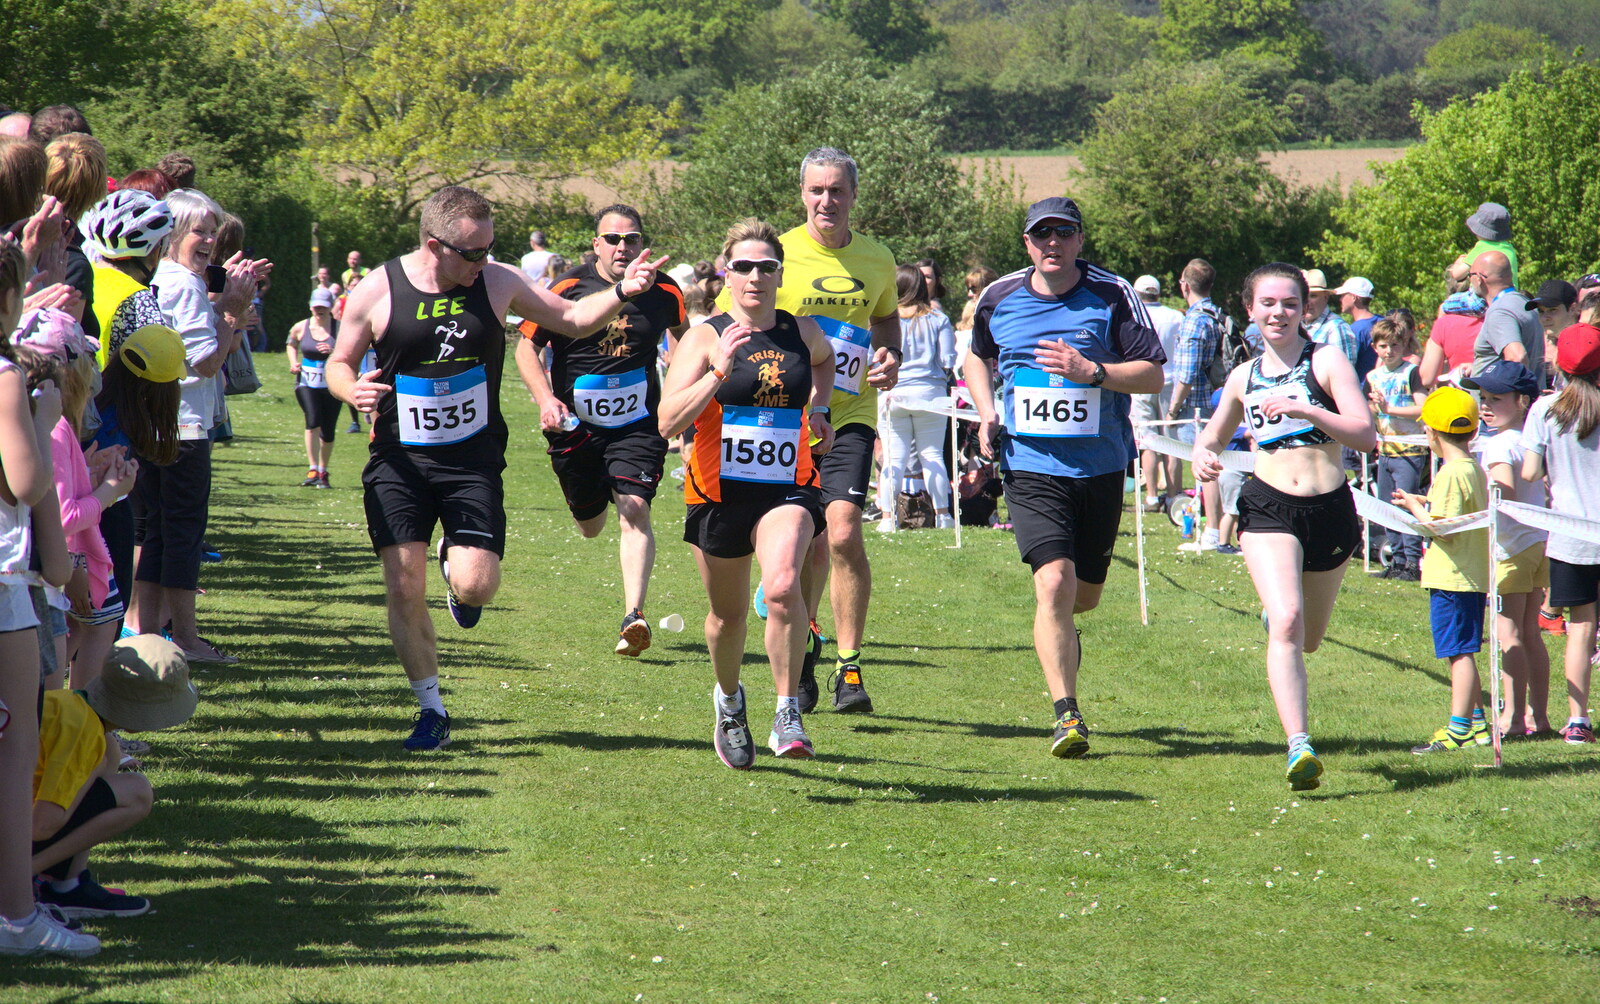 There's a sprint for the finish from Isobel's 10km Run, Alton Water, Stutton, Suffolk - 6th May 2018